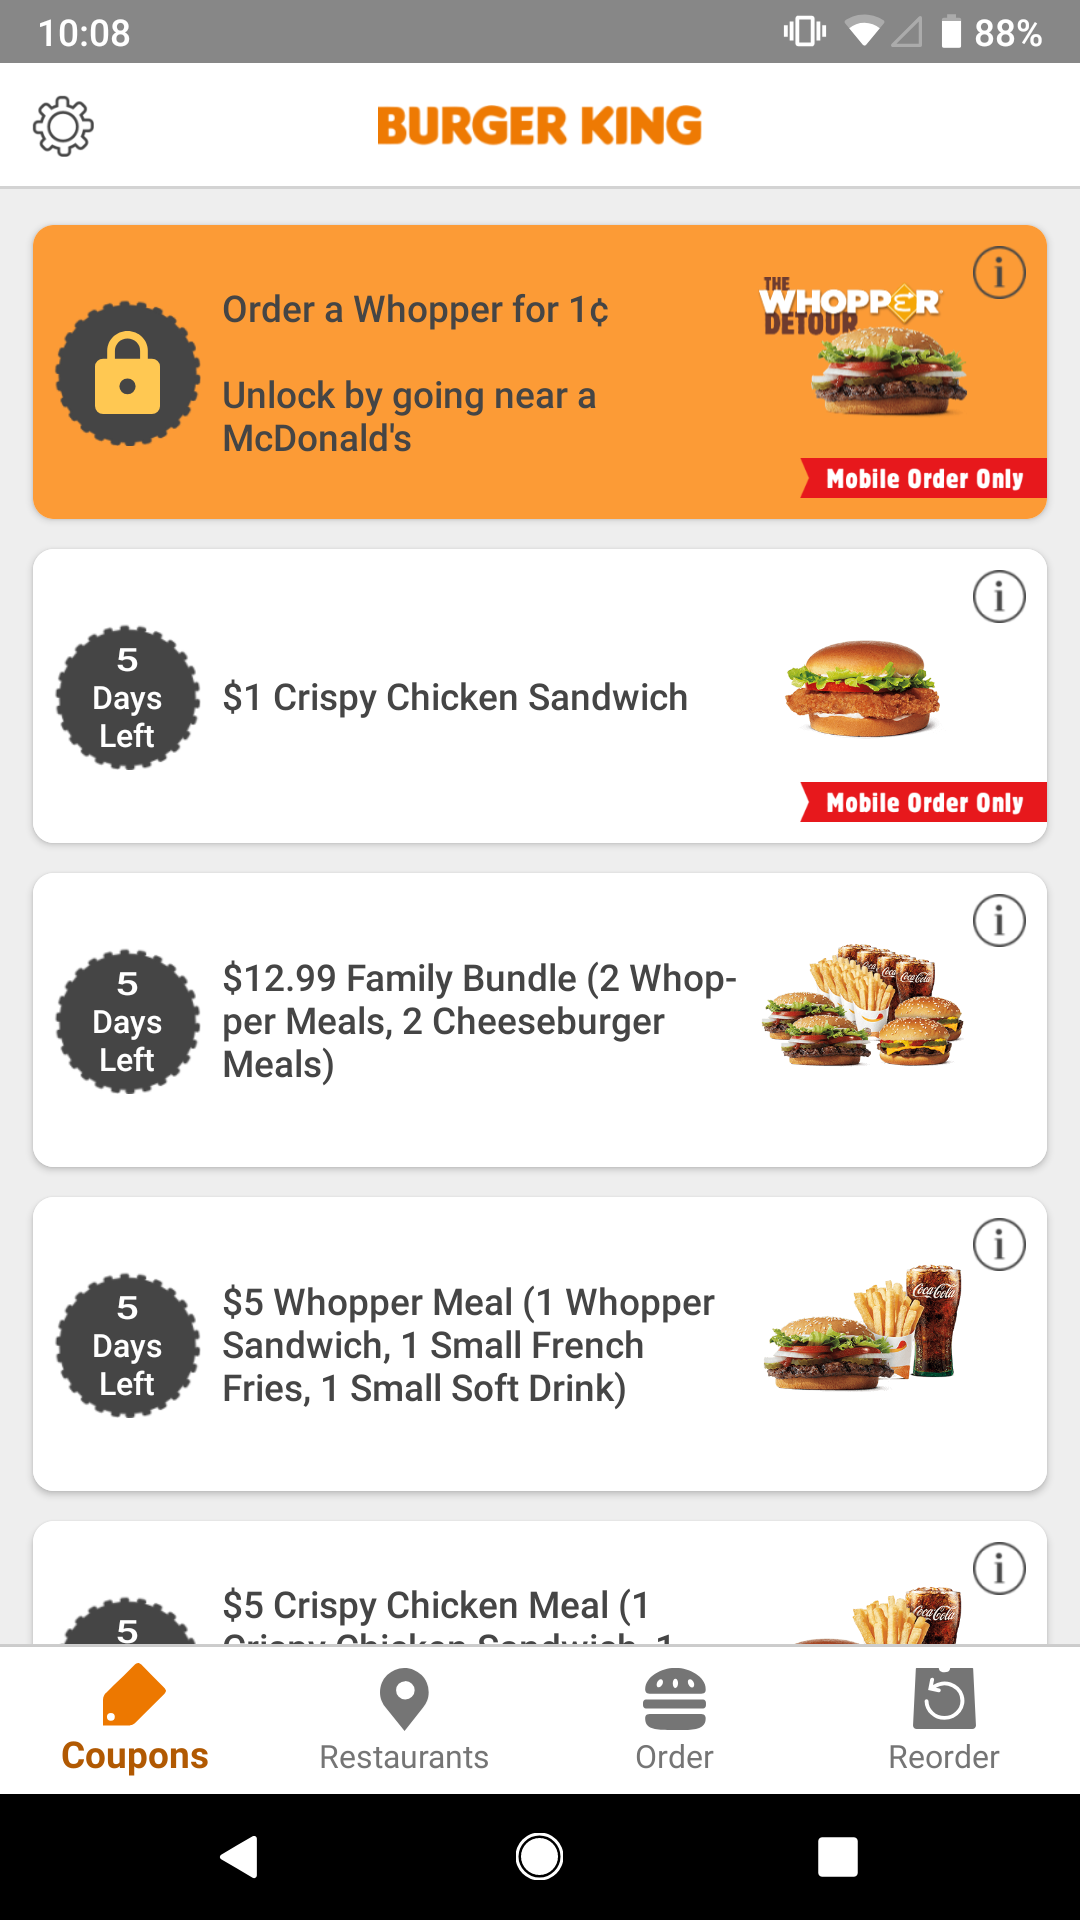 Burger King app offering 1¢ whoppers if you order it withing 600 ft. of a McDonald's